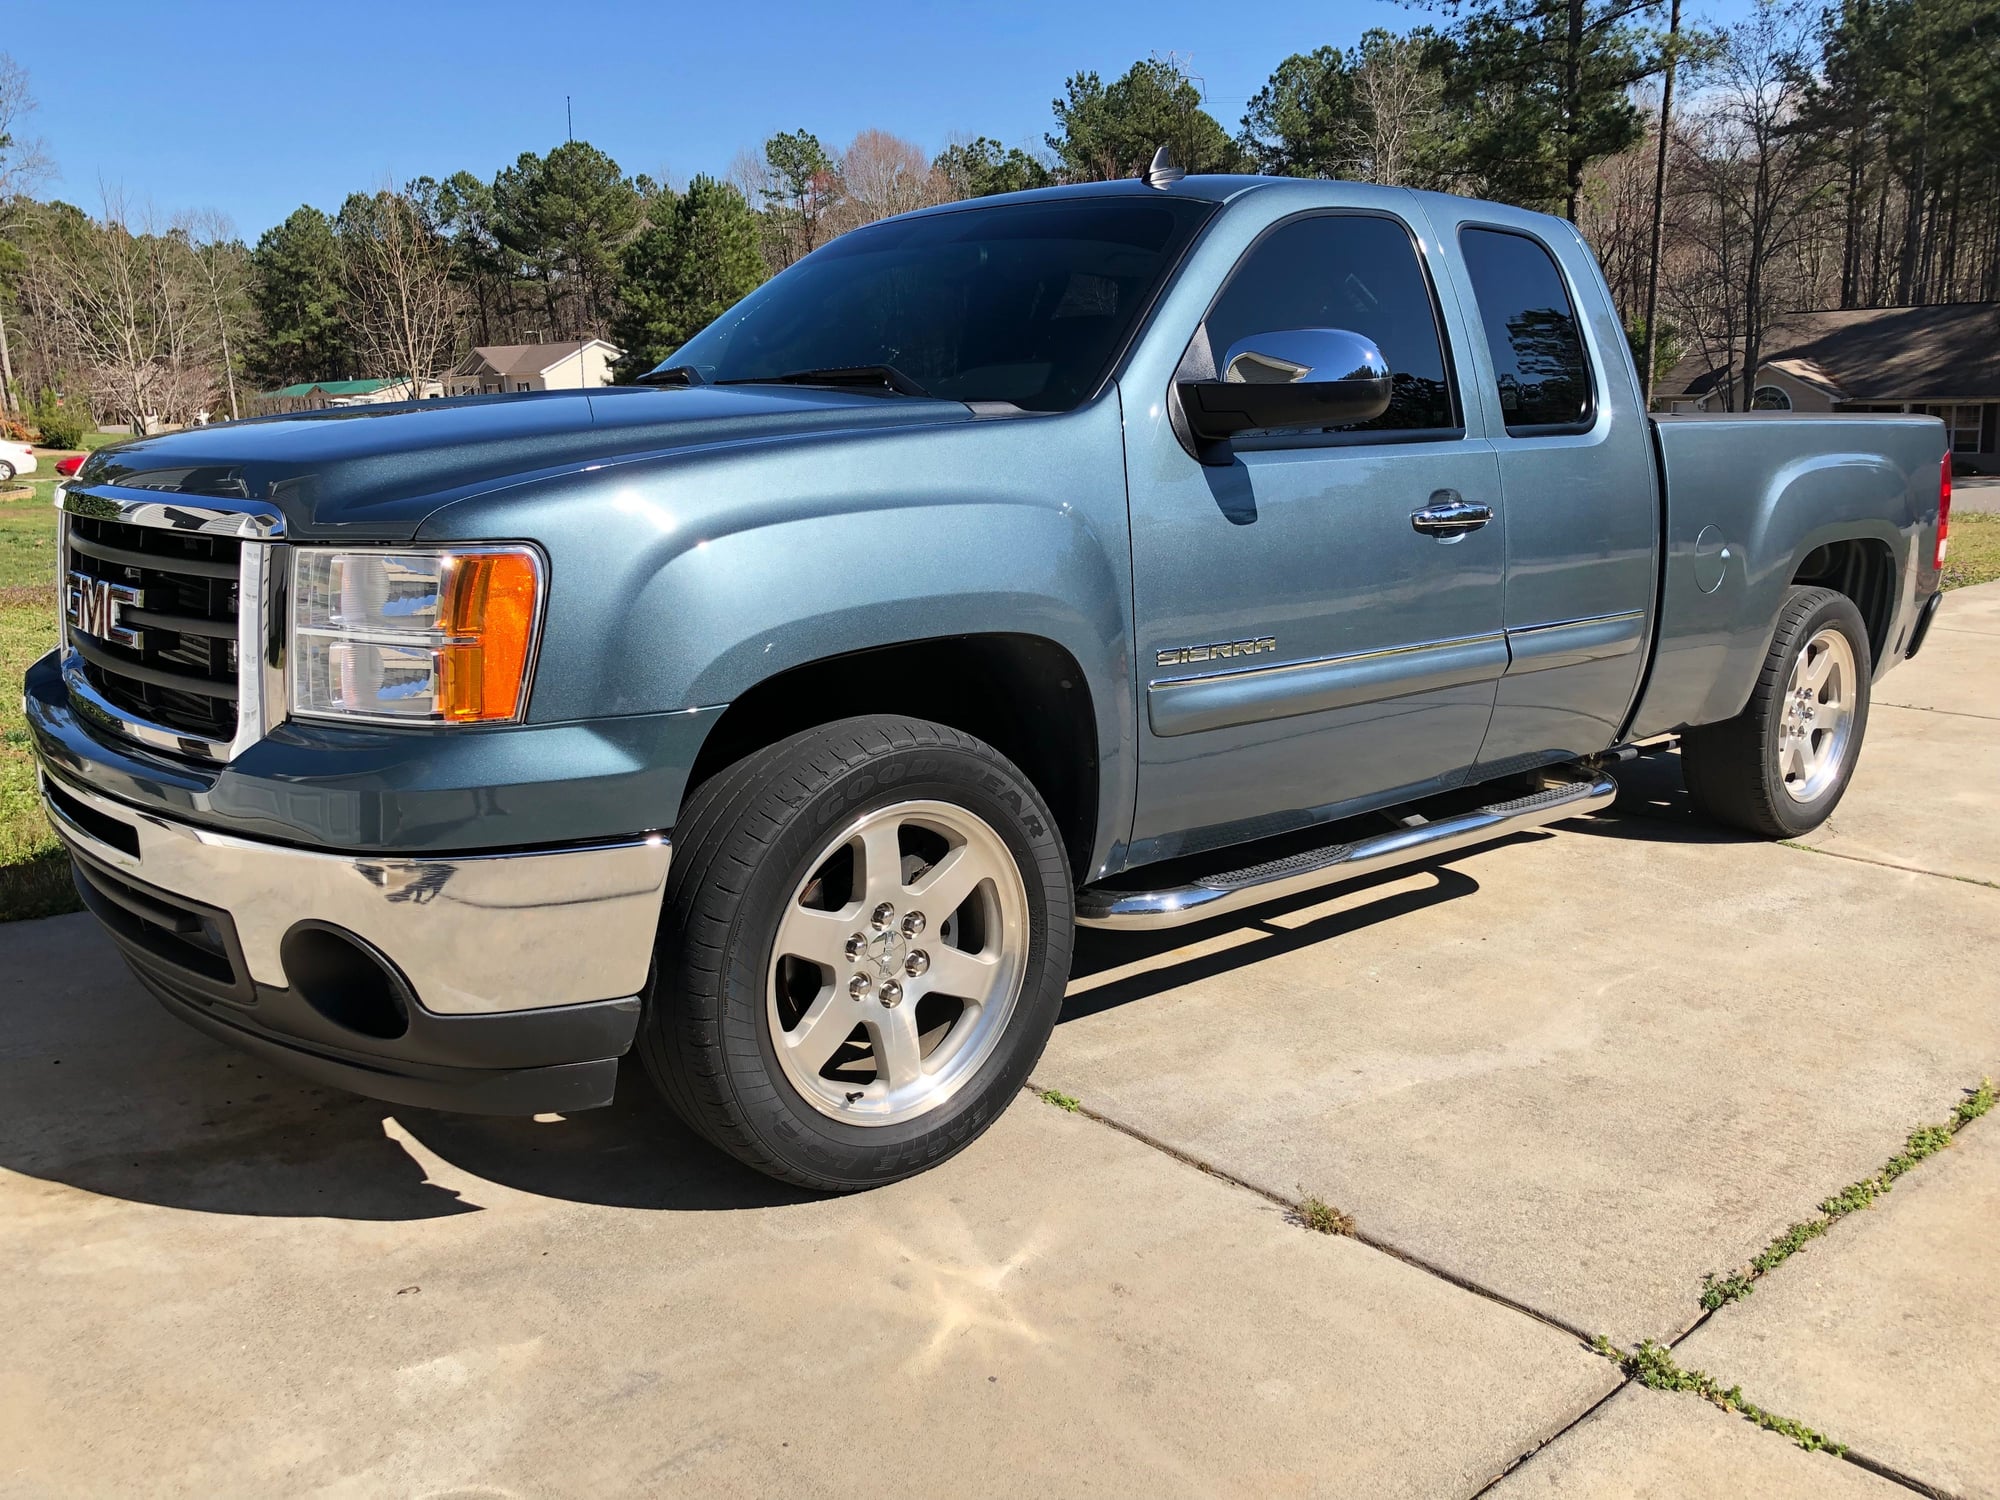 2011 Chevrolet Silverado 1500 - Turbo 2011 GMC Sierra - Used - VIN 1GTR1VE02BZ317397 - 60,000 Miles - 8 cyl - 2WD - Automatic - Truck - Other - Troutman, NC 28166, United States